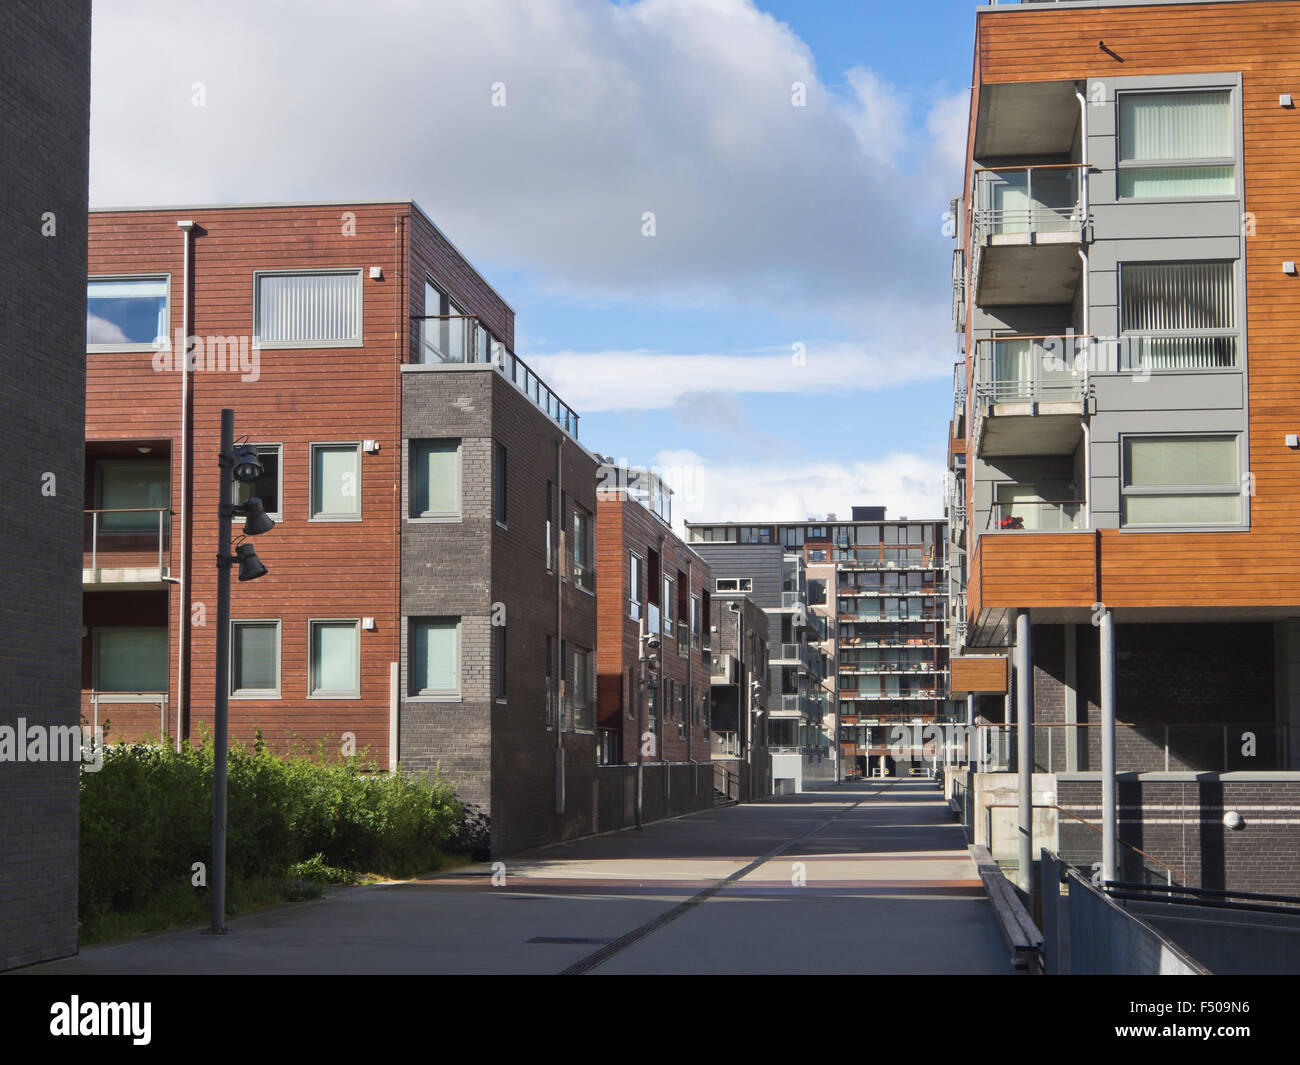 Jattavagen, Stavanger Norway, former industrial area now converted to modern living on the fjord Stock Photo